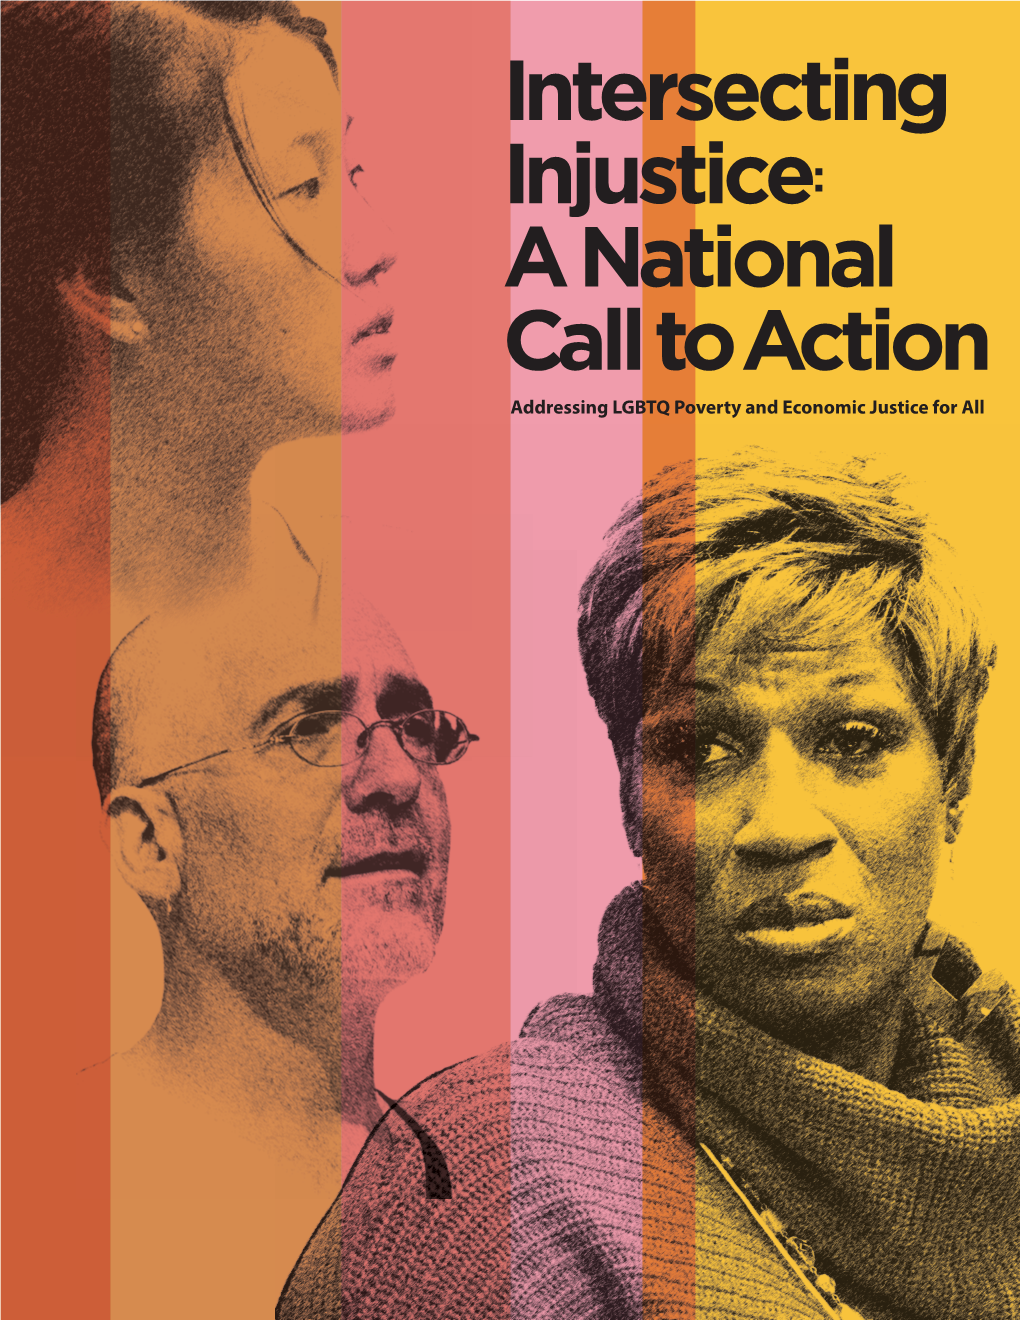 Intersecting Injustice: a National Call to Action